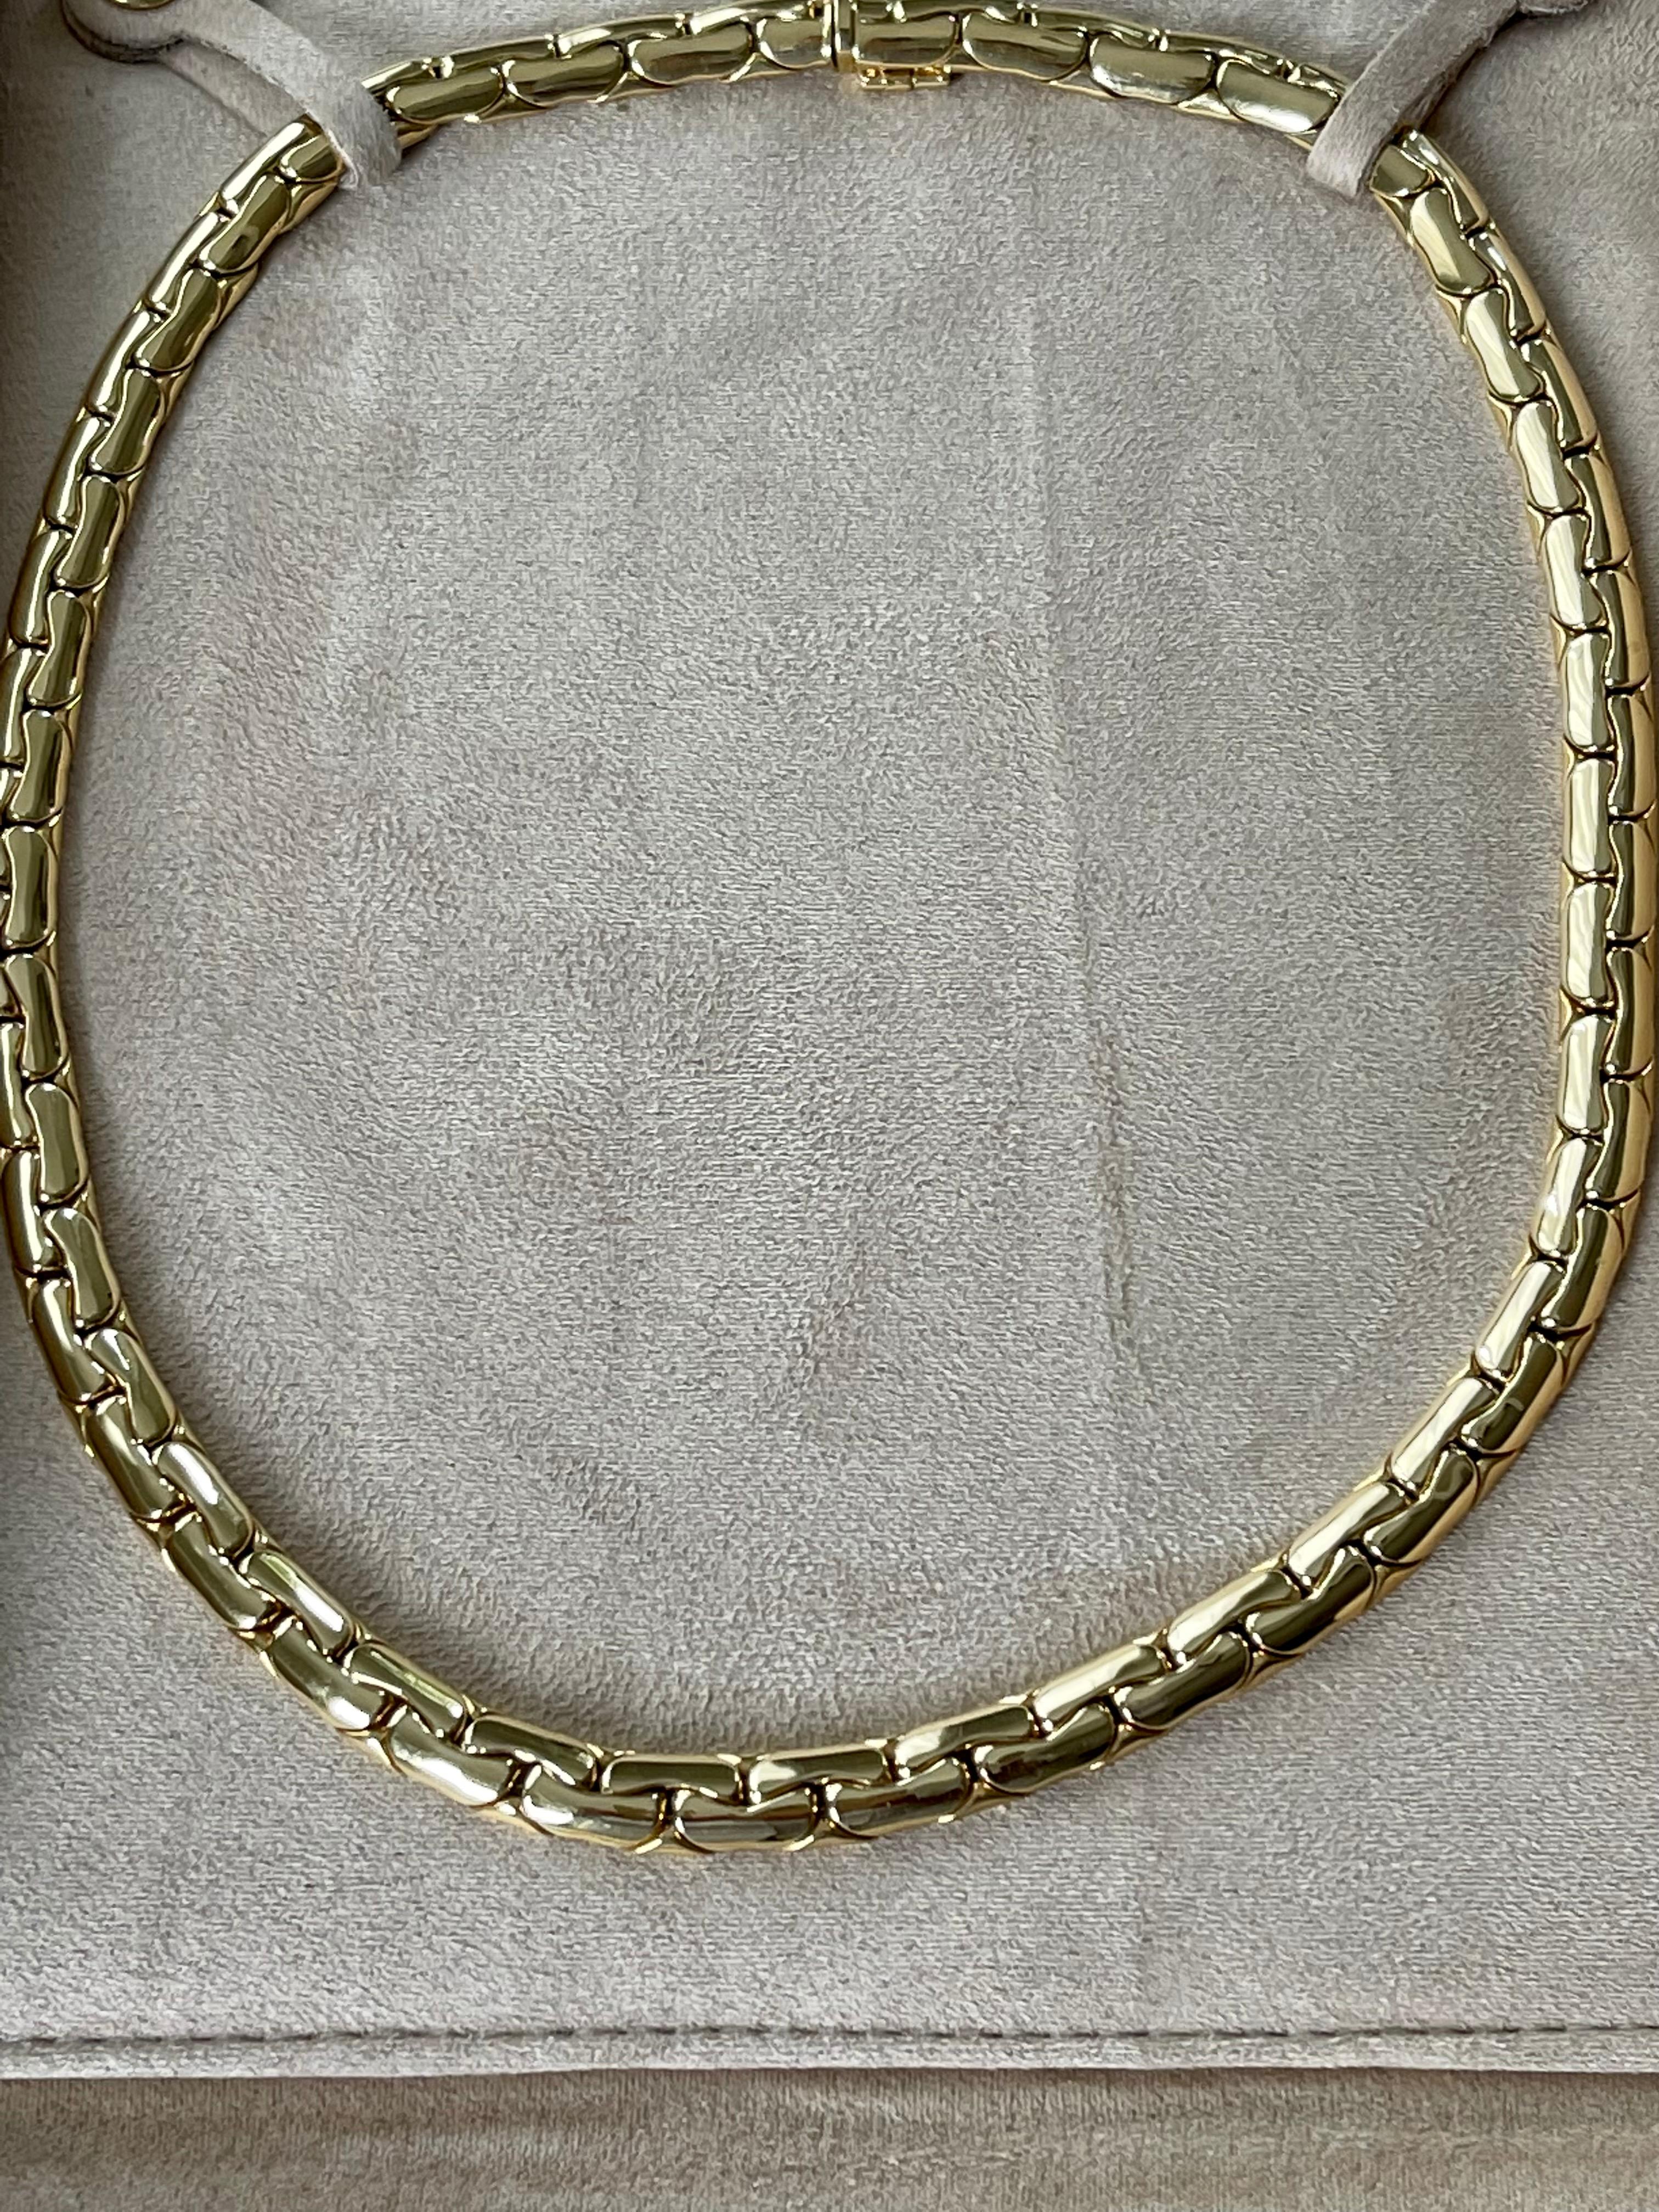 Handmade 18 K Yellow Gold Necklace by Gübelin Lucerne For Sale 4